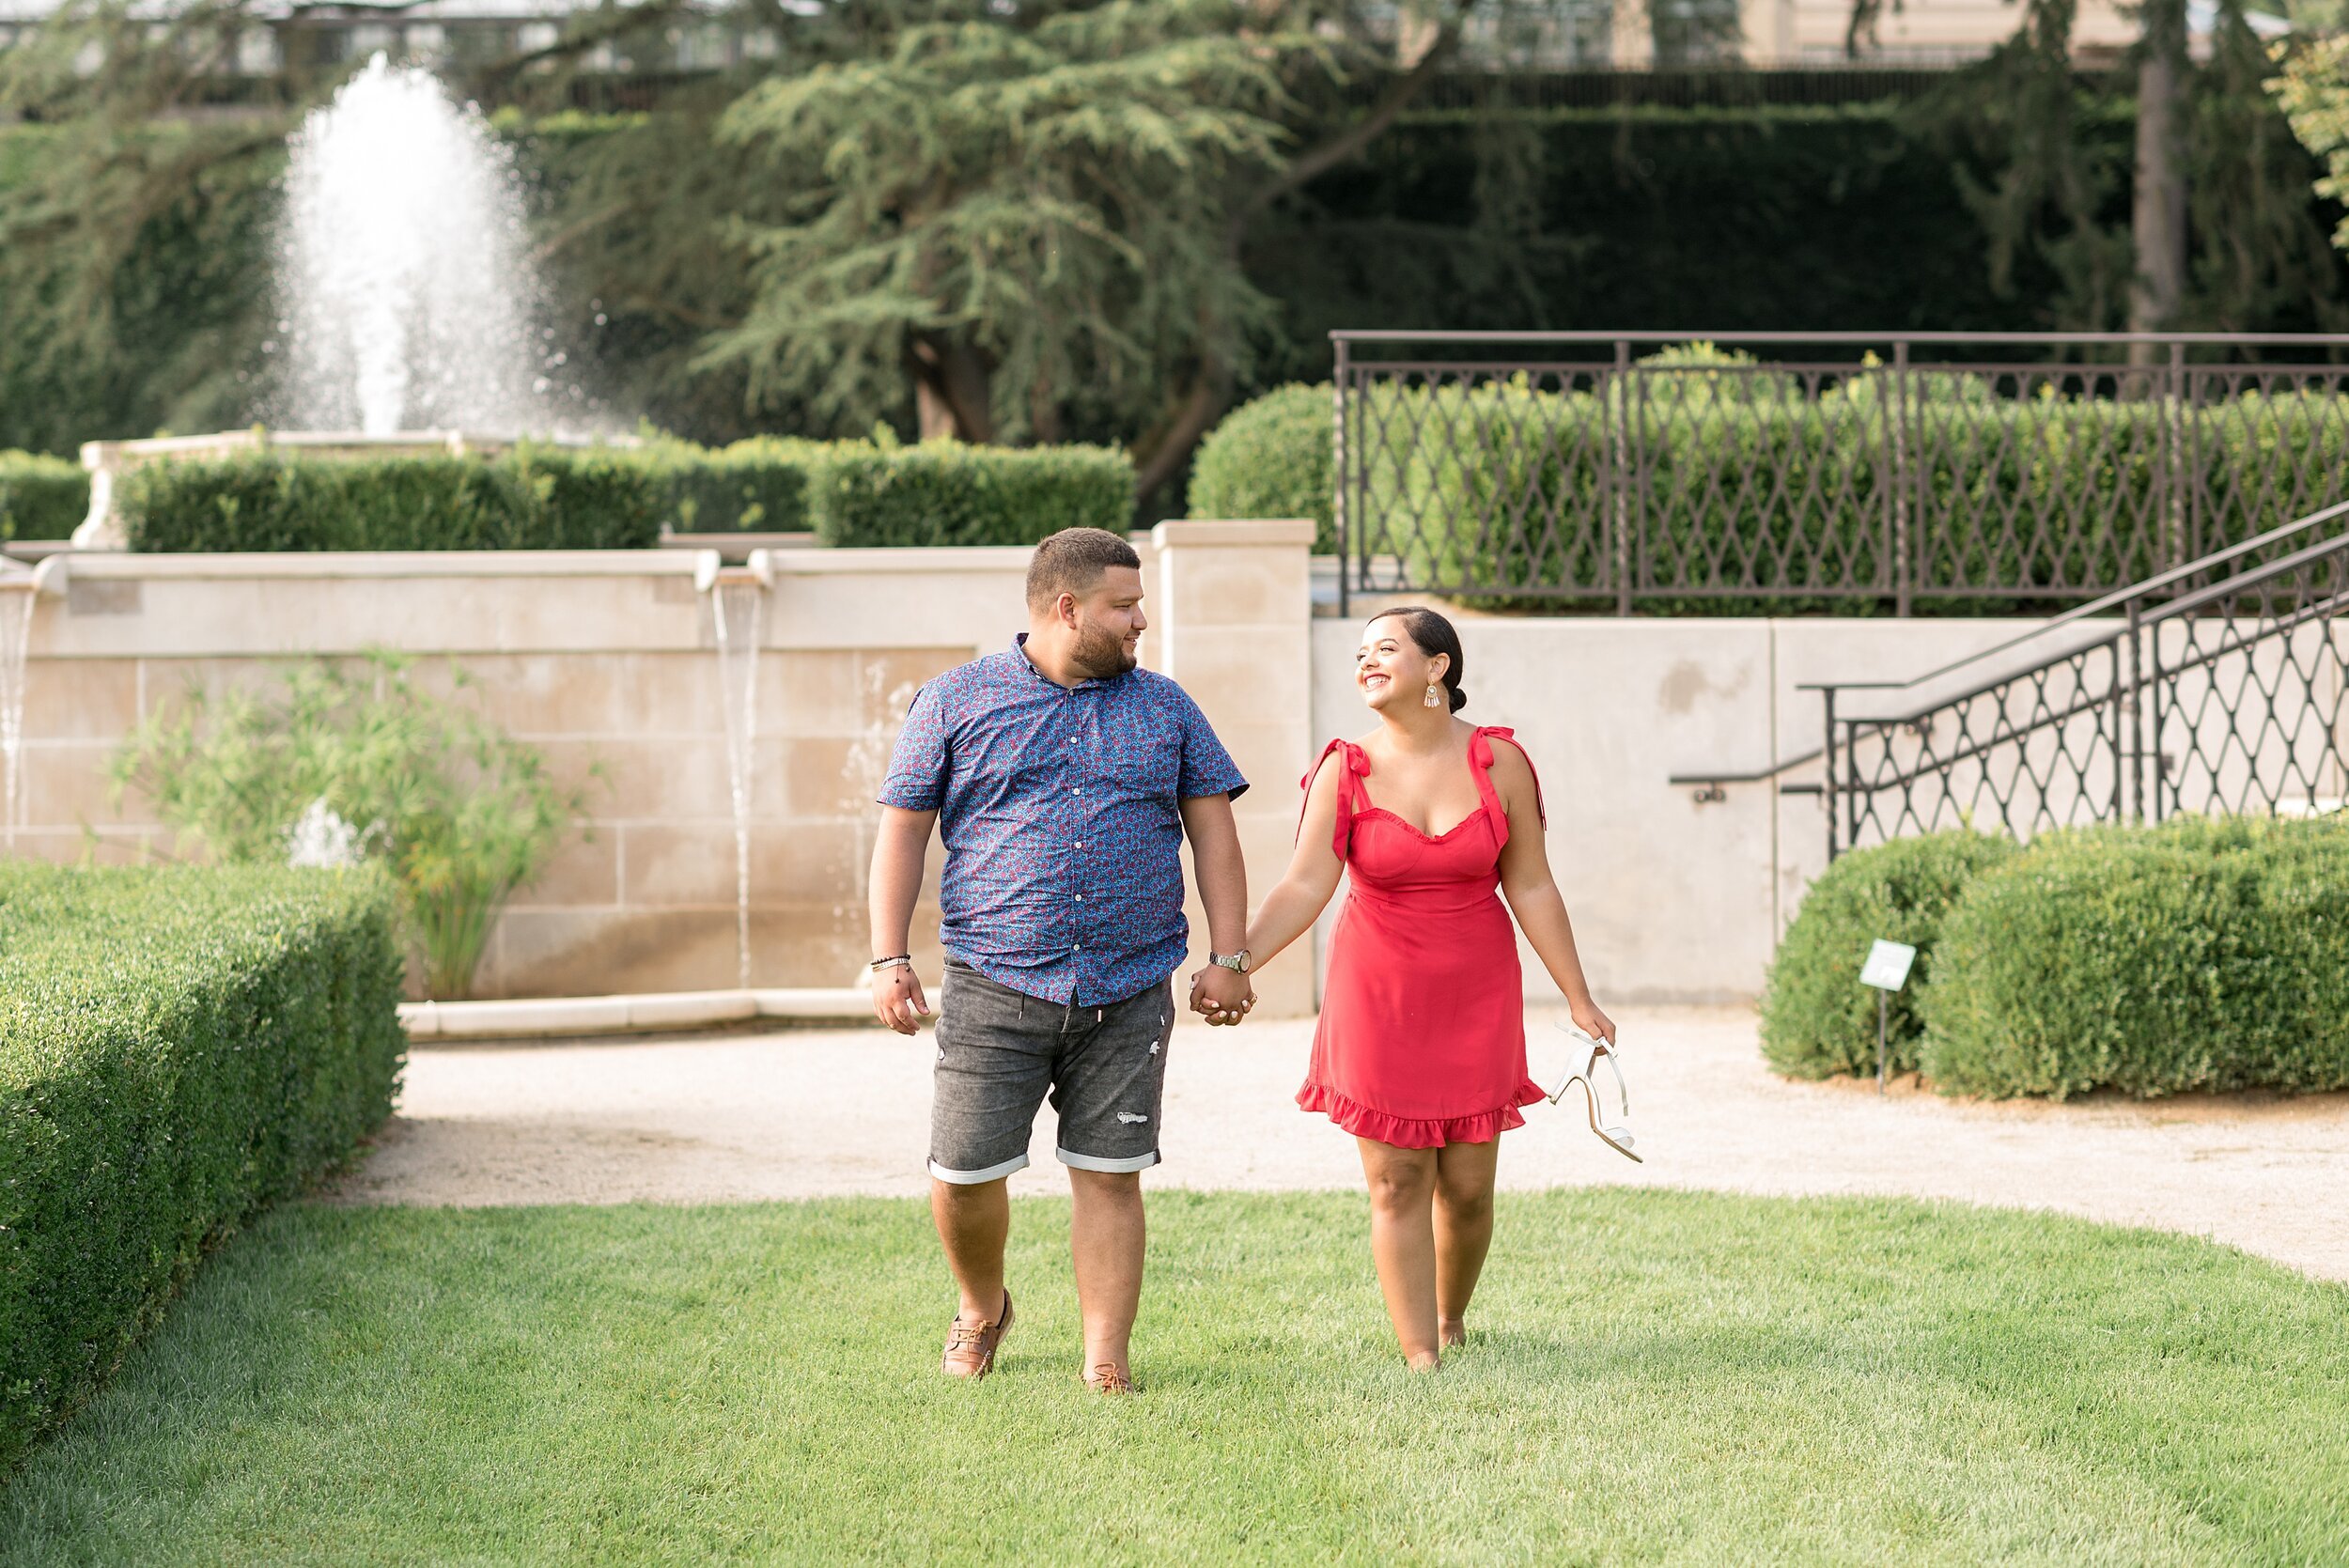 Longwood Gardens Kennet Square Pa Summer Engagement Session Photography_7694.jpg